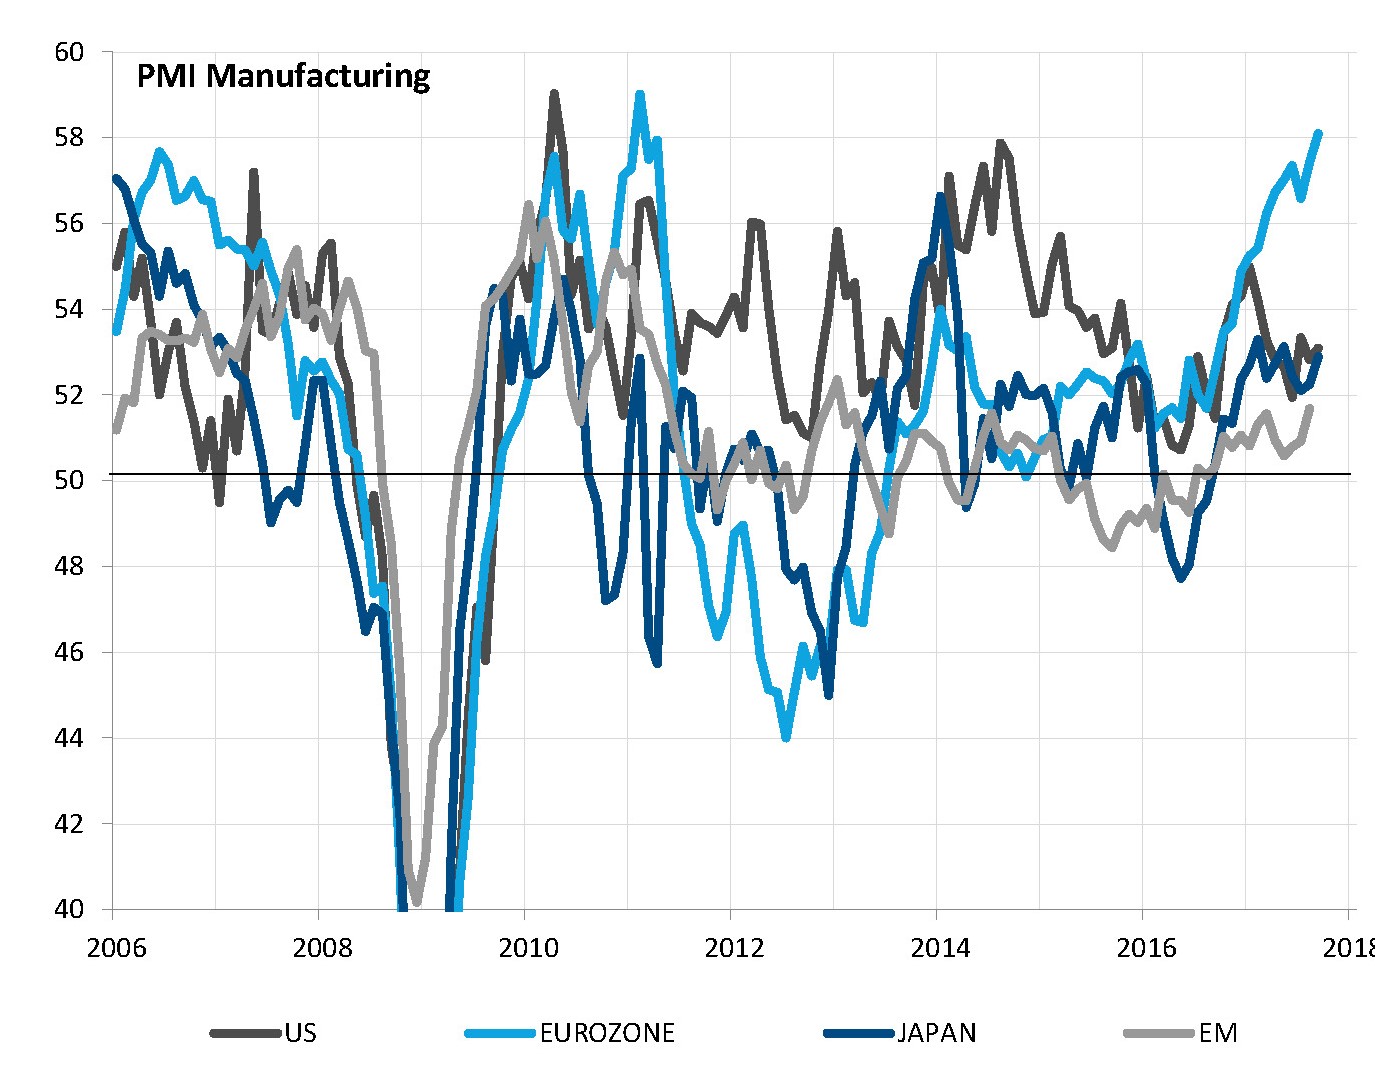 Cyclical indicators all point to global expansion, with Europe standing out